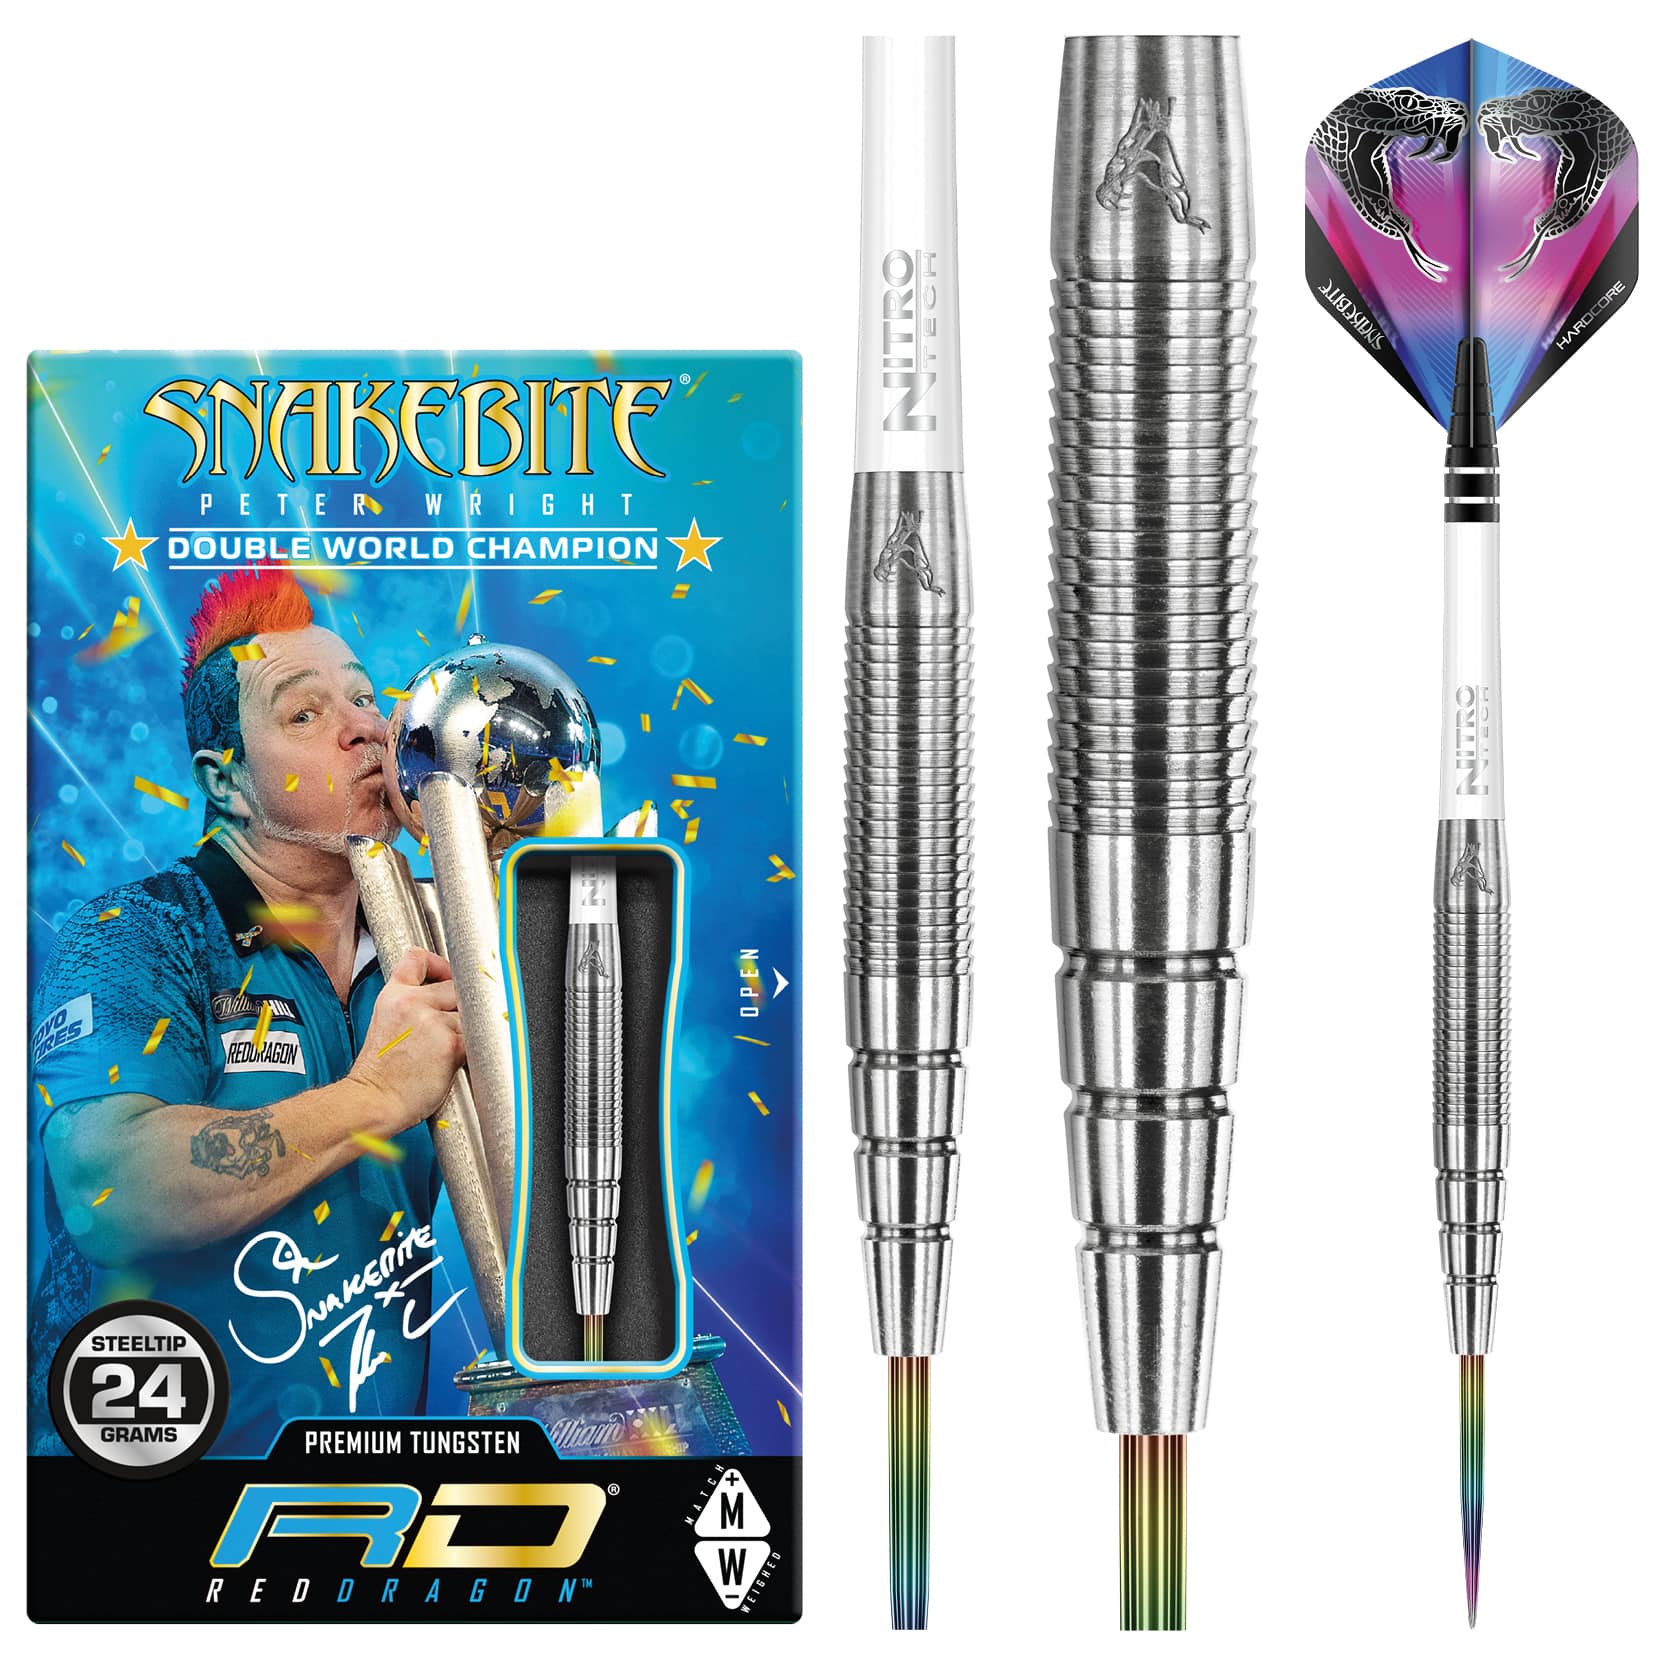 Peter Wright PL15